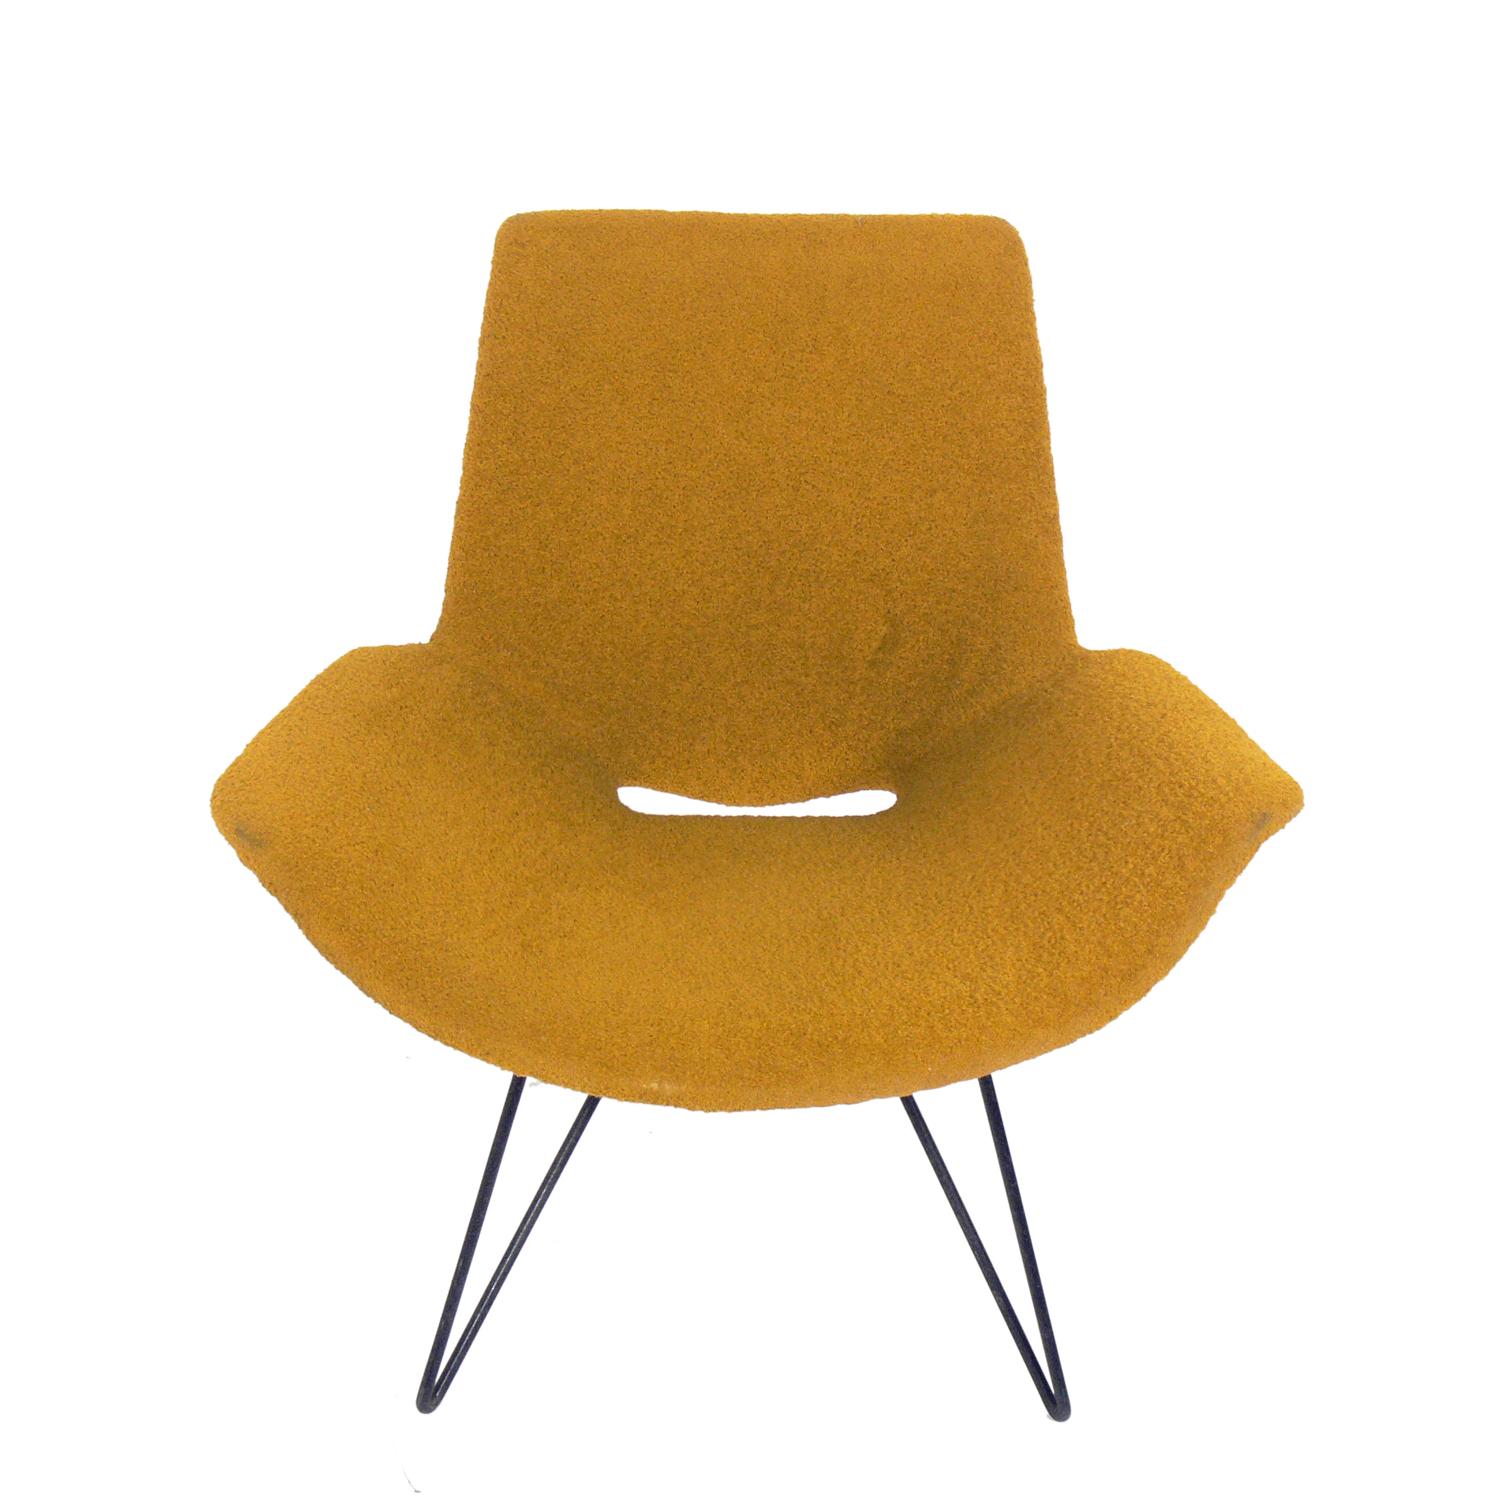 Mid-Century Modern Curvaceous Midcentury Chair Attributed to Martin Eisler